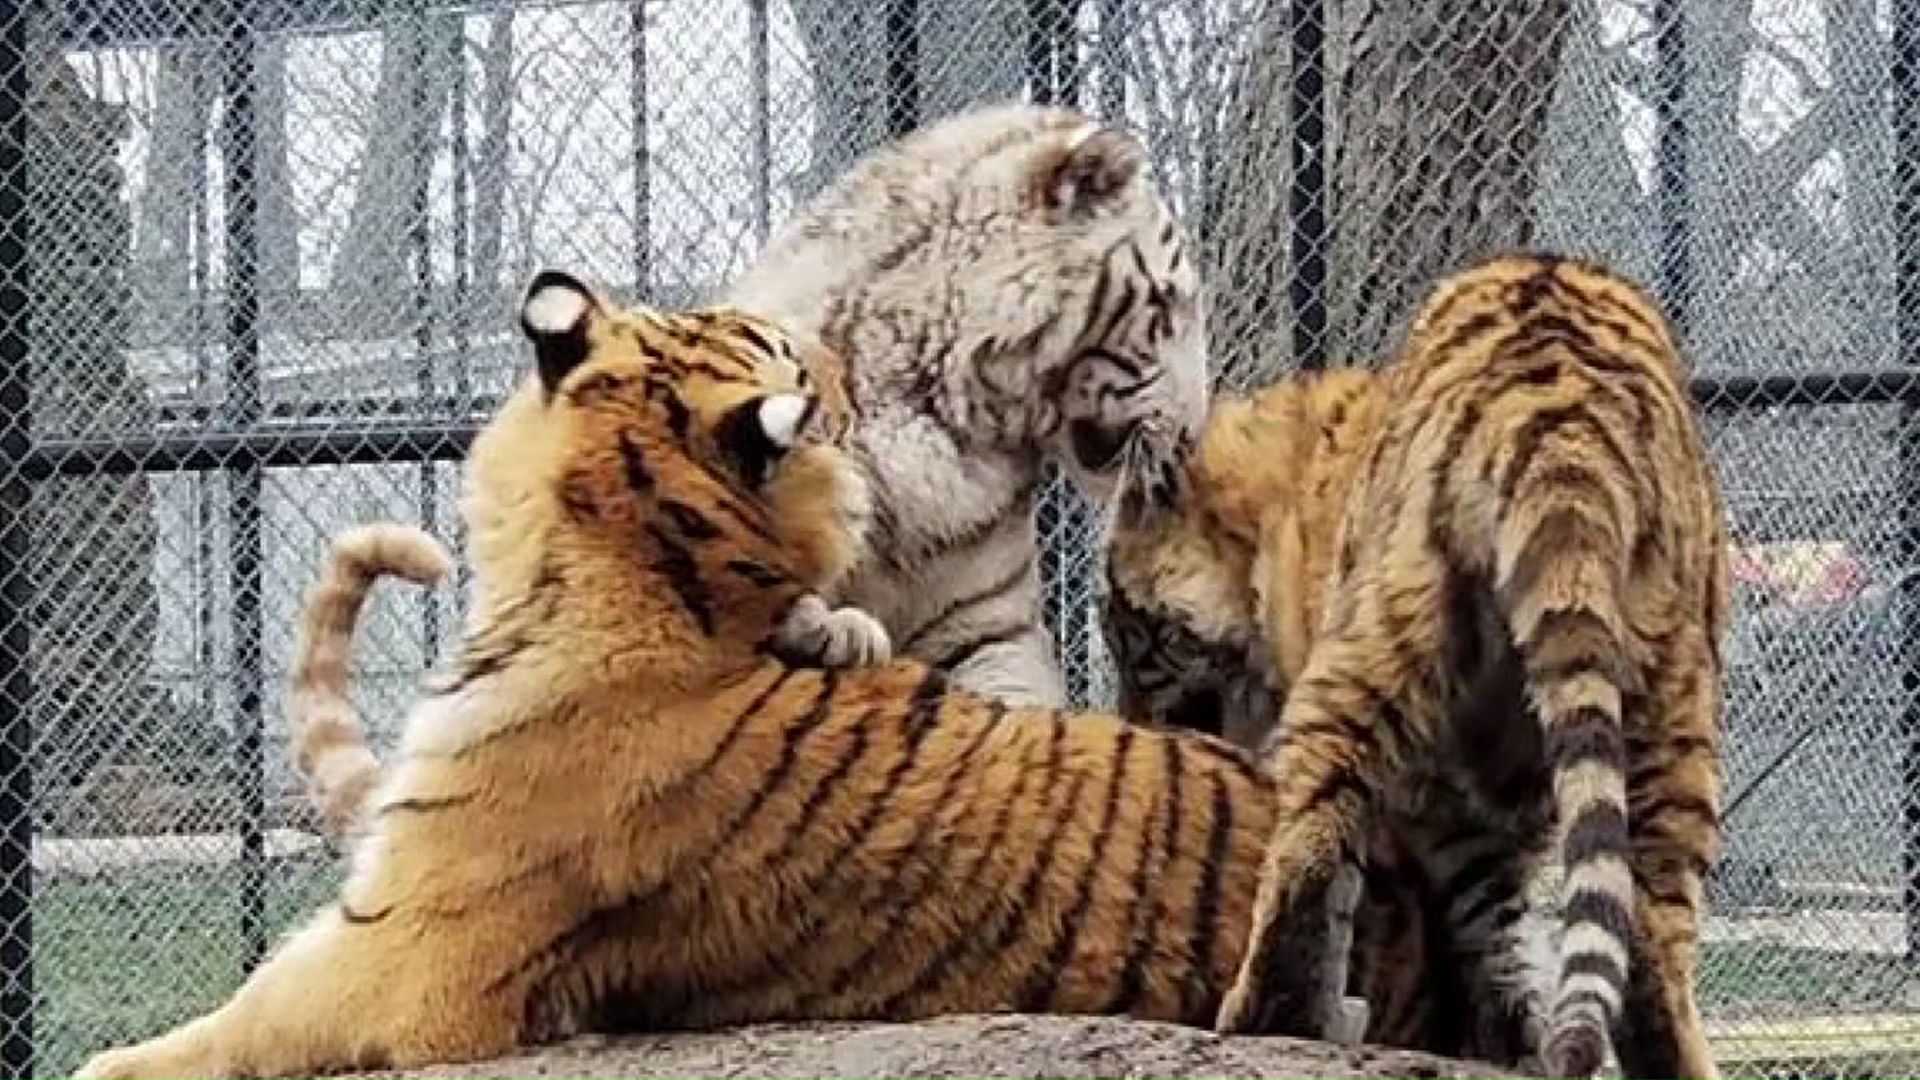 Tigers Named After Star Wars Characters Get Second Chance